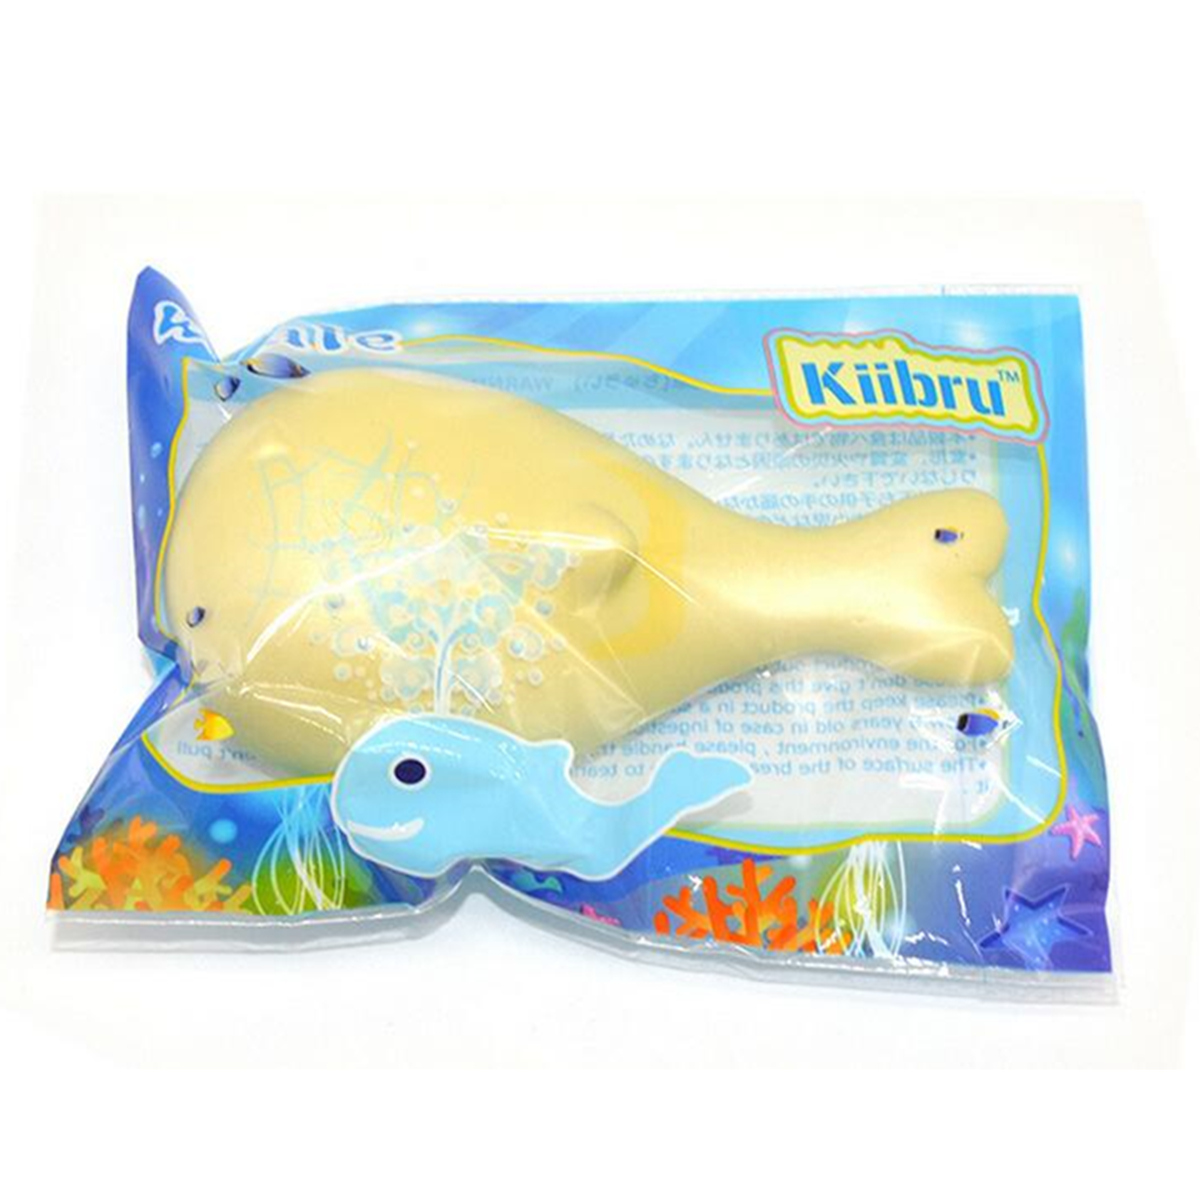 15cm-Whale-Squishy-Slow-Rising-Pressure-Release-Soft-Toy-With-Keychains-for-Iphone-Samsung-Xiaomi-1145805-8